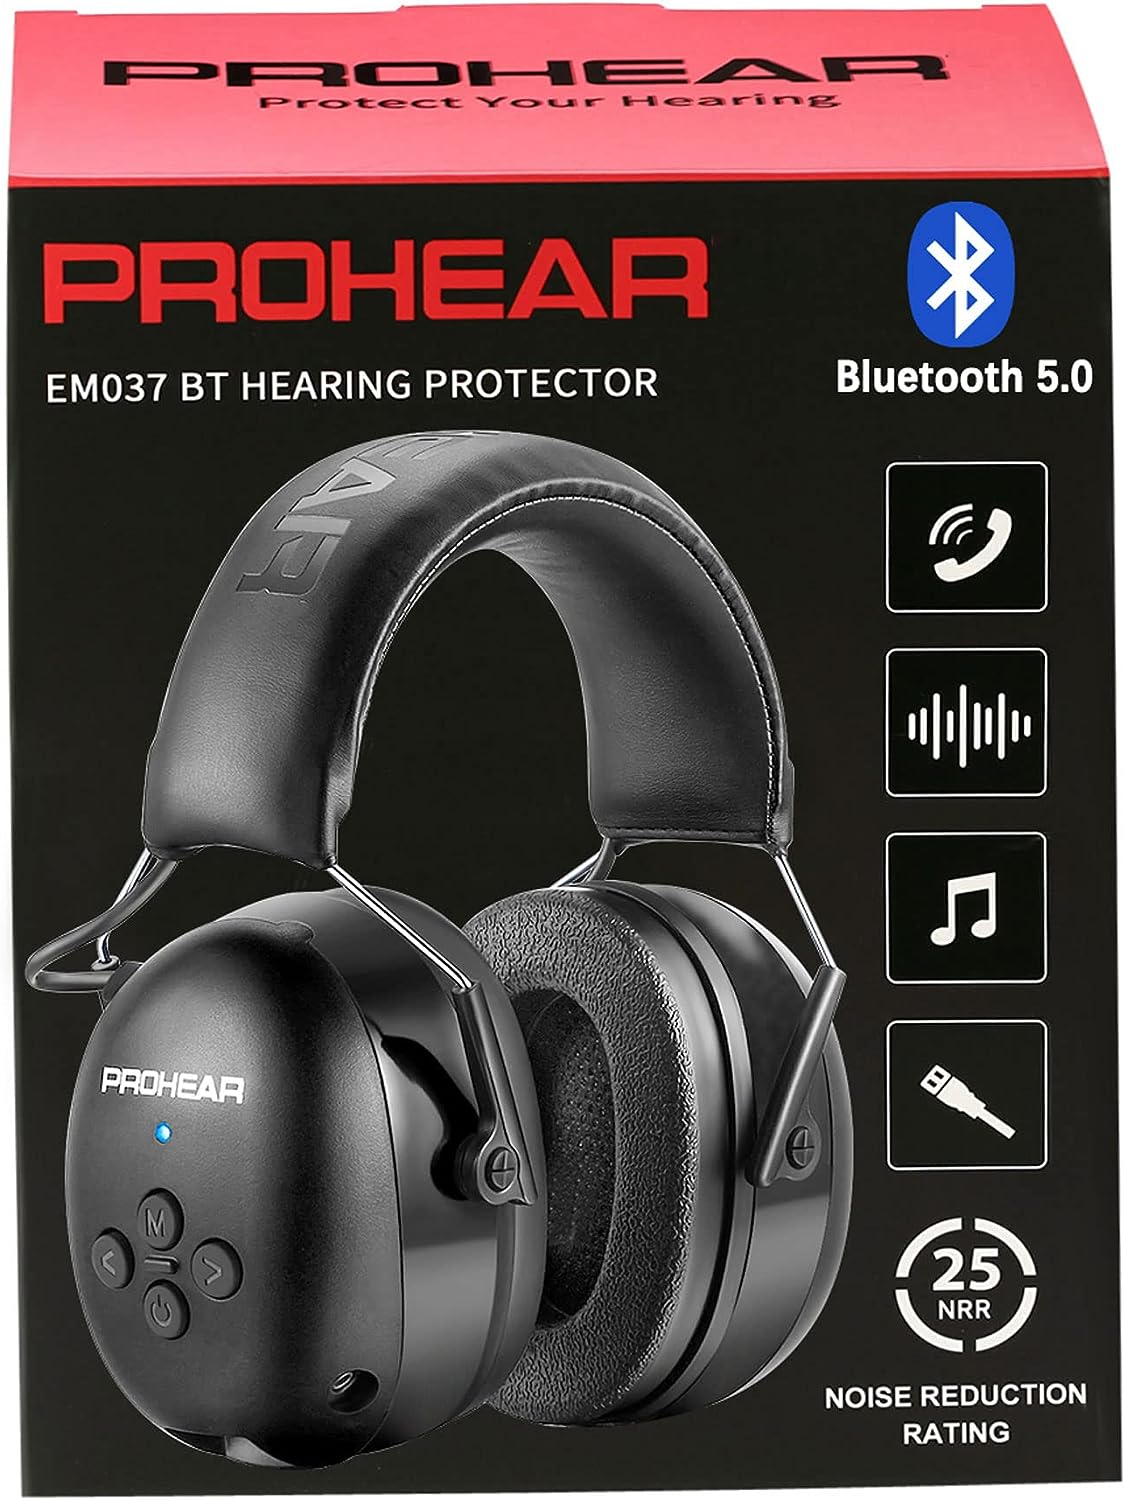 Generic PROHEAR 037 Bluetooth 5.0 Hearing Protection Headphones with Rechargeable 1100mAh Battery, 25dB NRR Safety Noise Reduction Ear